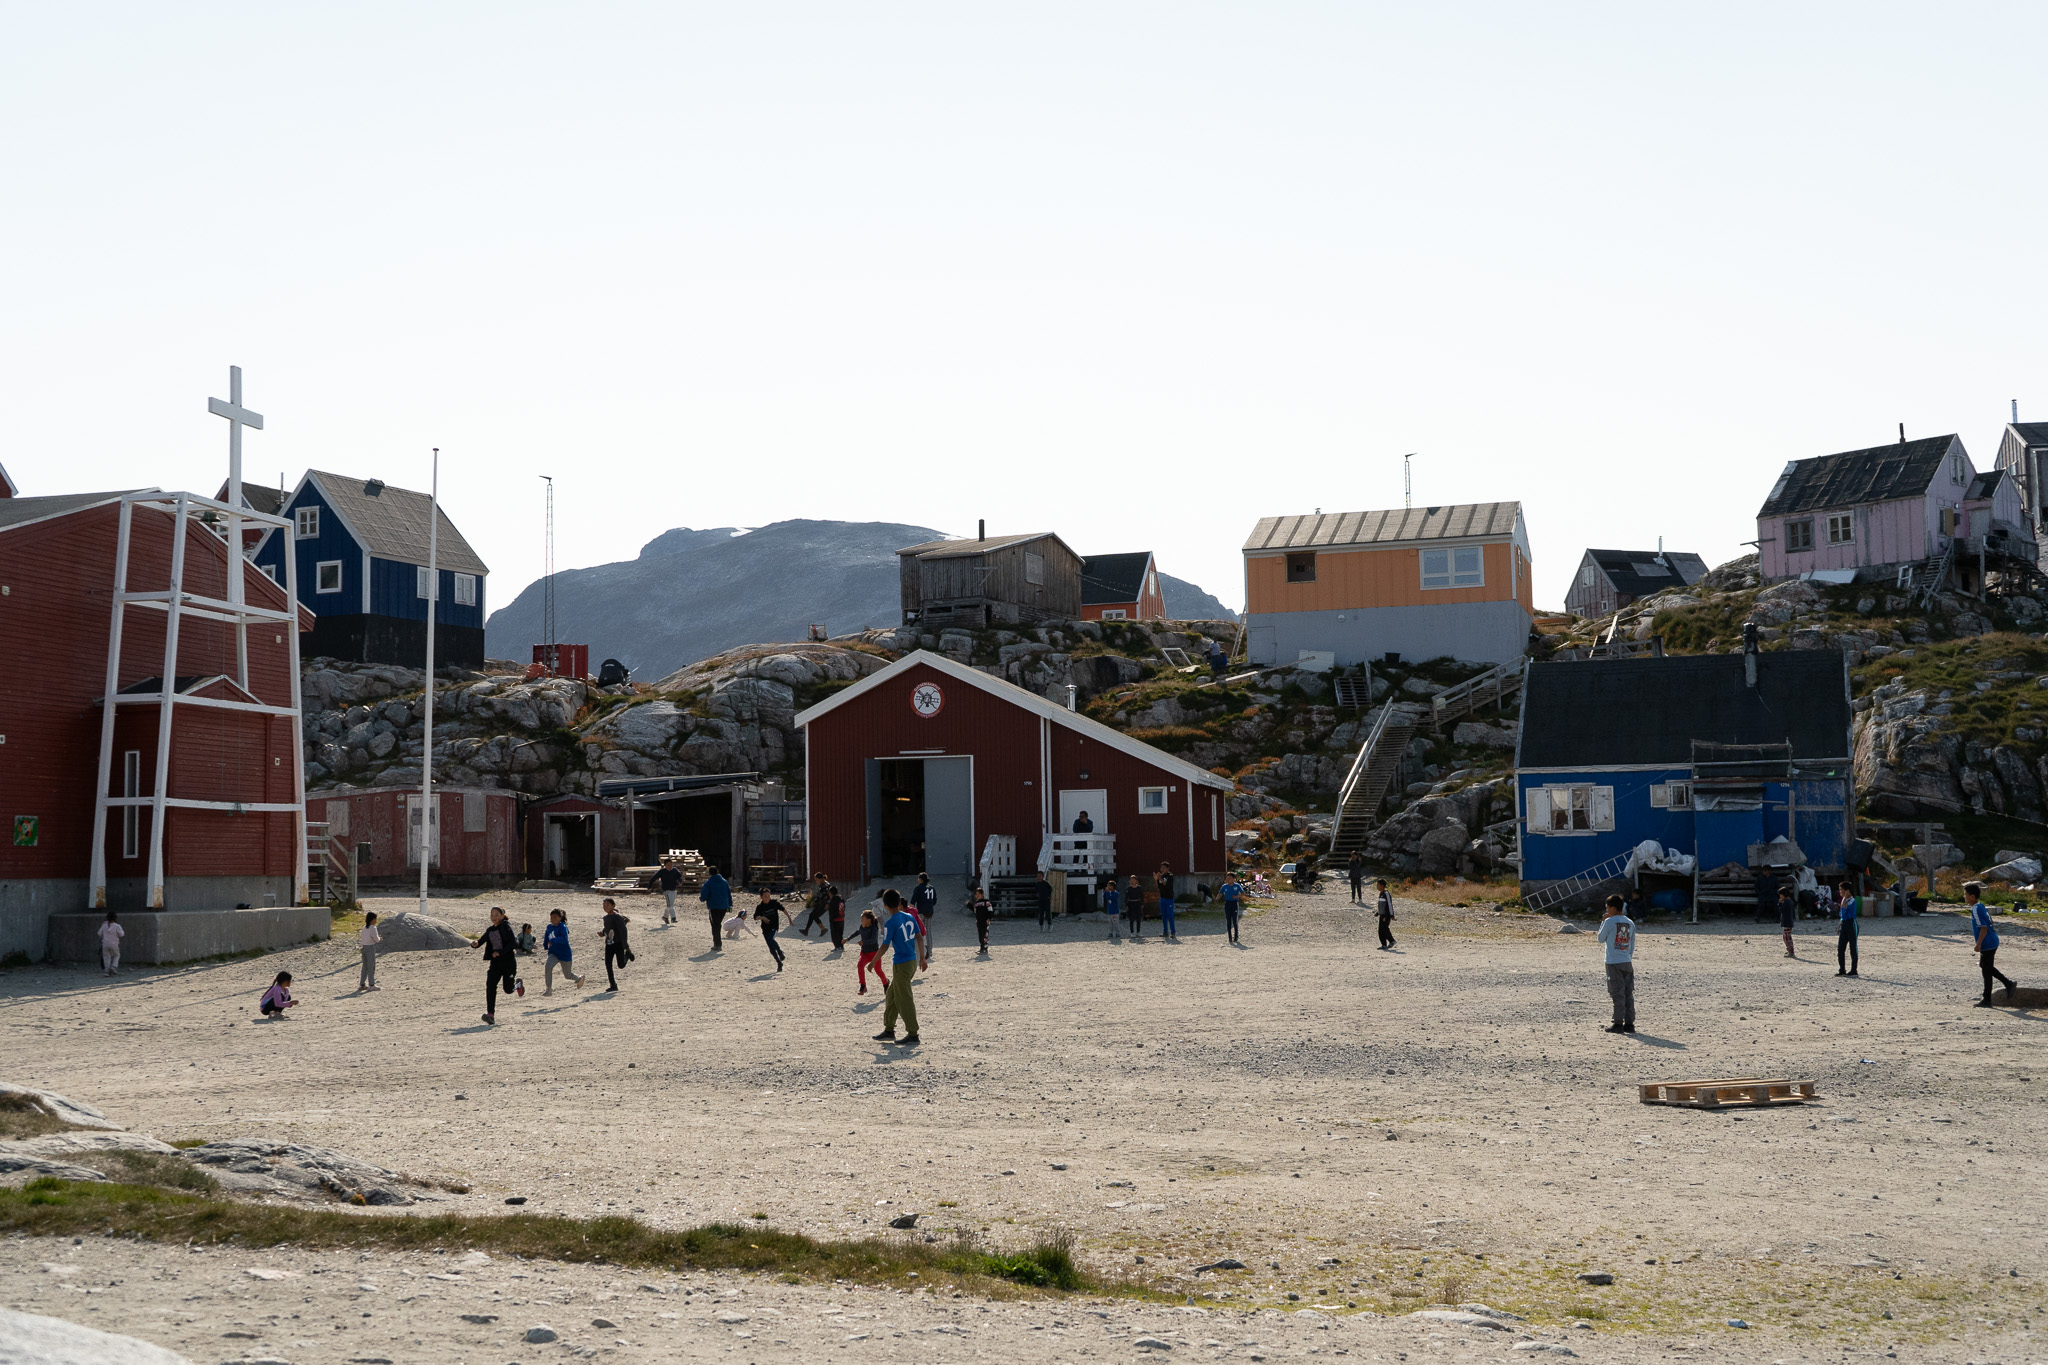 Children playing football in the center of the settlement. Photo by Visit East Greenland